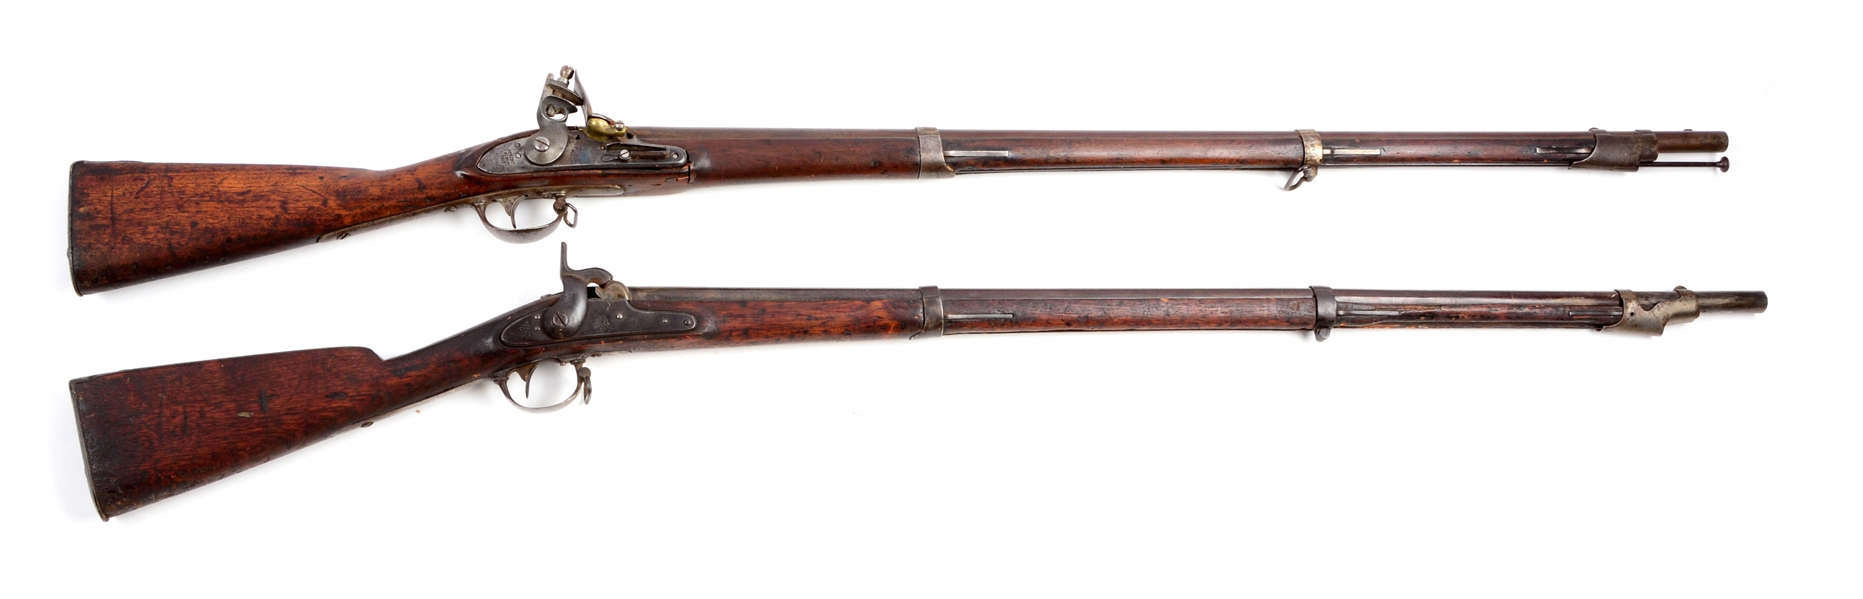 LOT OF 2: (A) EARLY U.S. SPRINGFIELD MODEL 1816 AND 1842 MUSKETS.